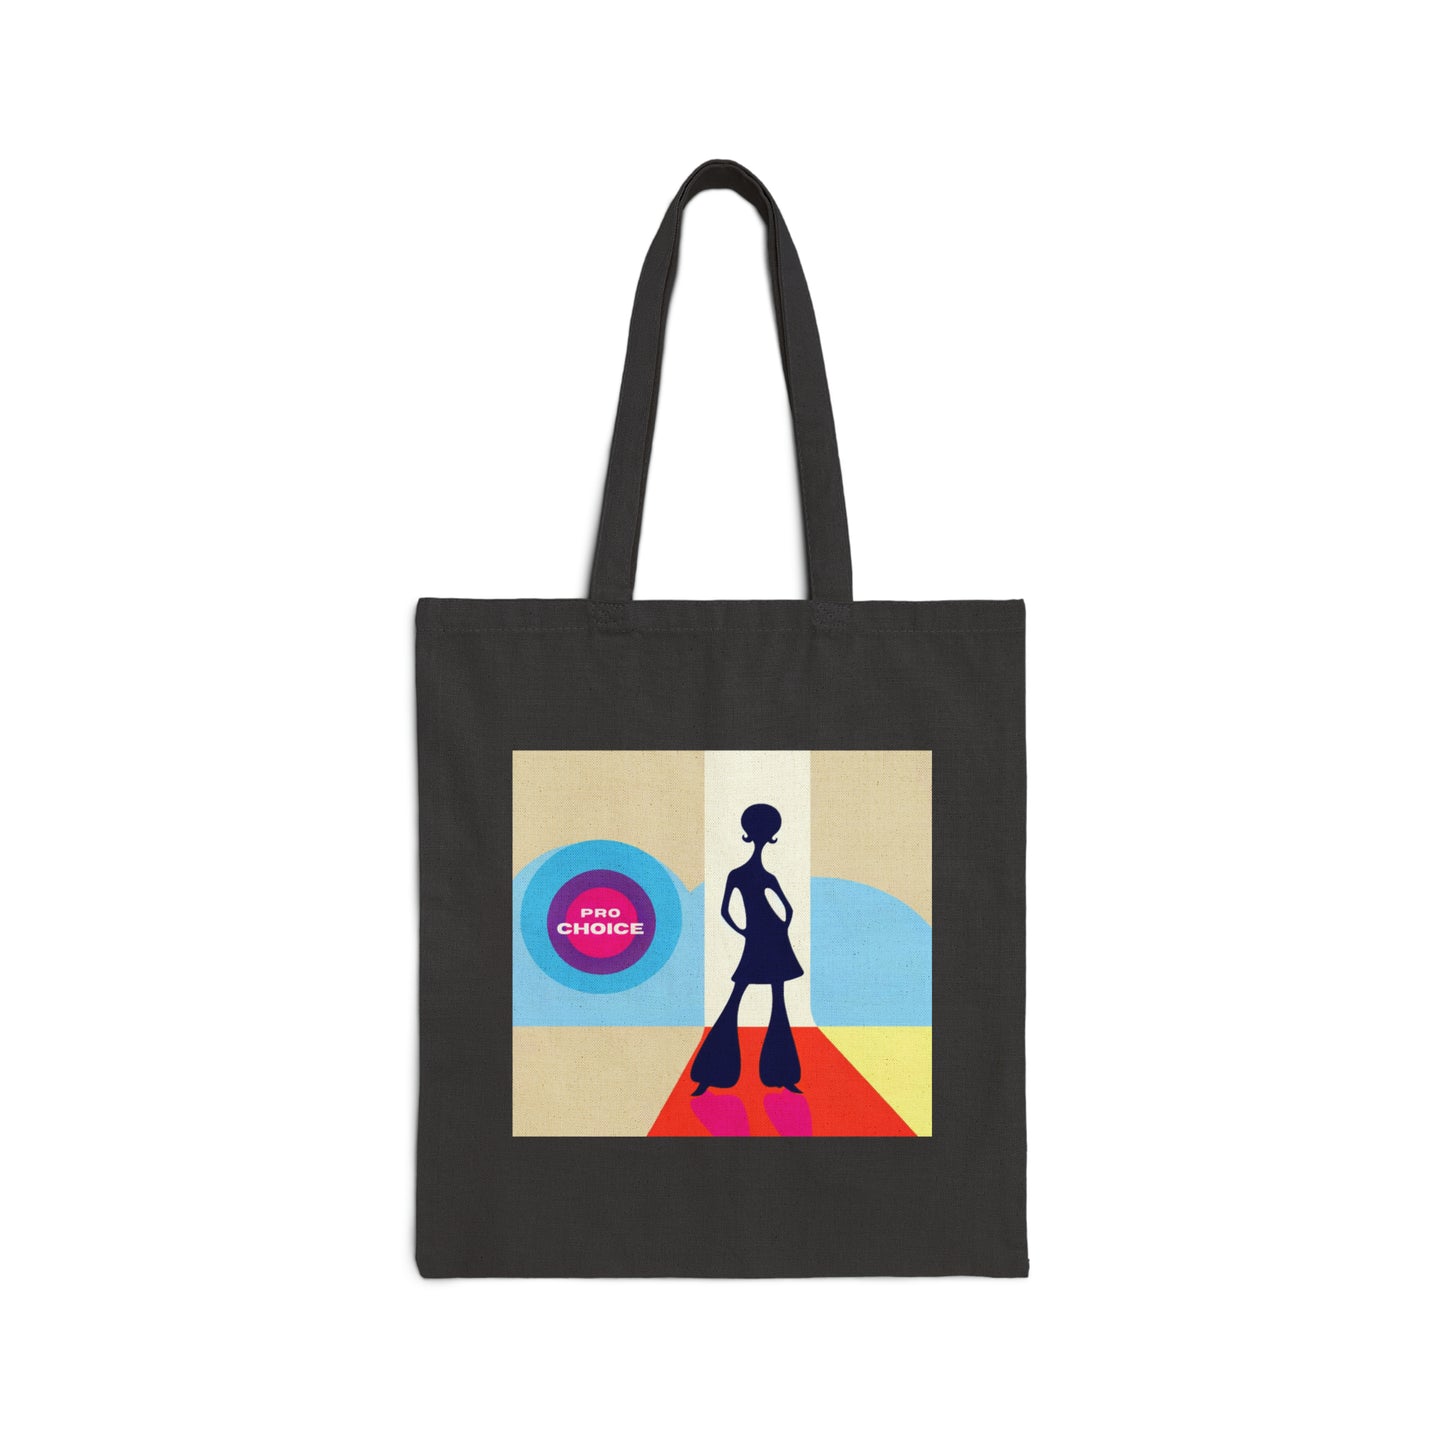 Pro Choice! Bold Statement Cotton Cavas Tote Bag: carry a laptop, kindle, phone, ipad, notebook goodies to work/coffee house